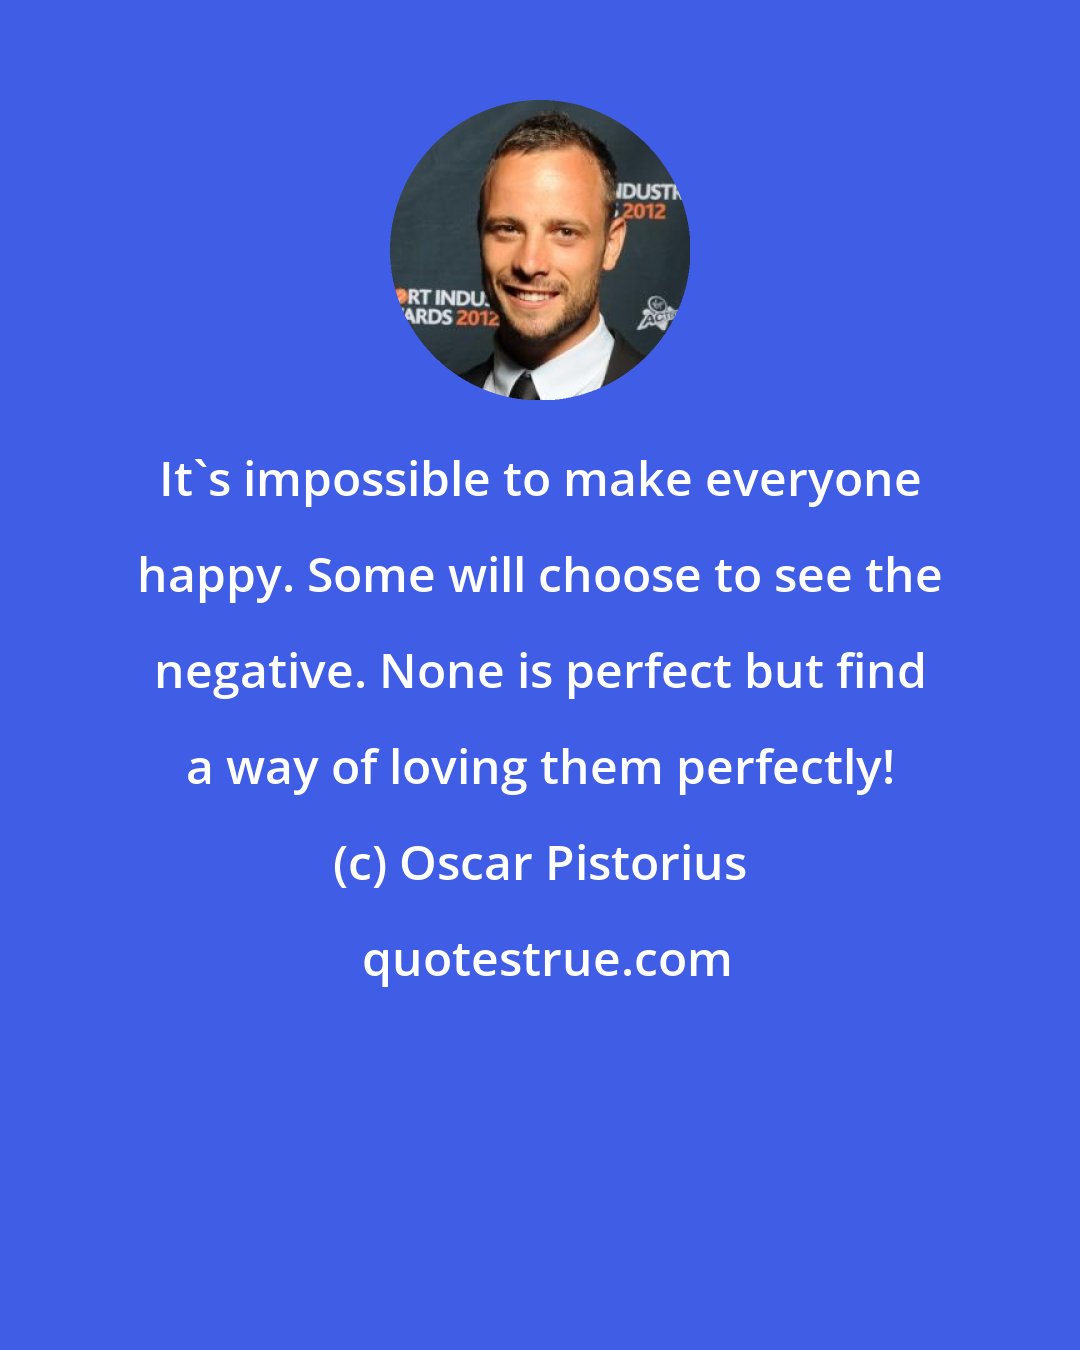 Oscar Pistorius: It's impossible to make everyone happy. Some will choose to see the negative. None is perfect but find a way of loving them perfectly!